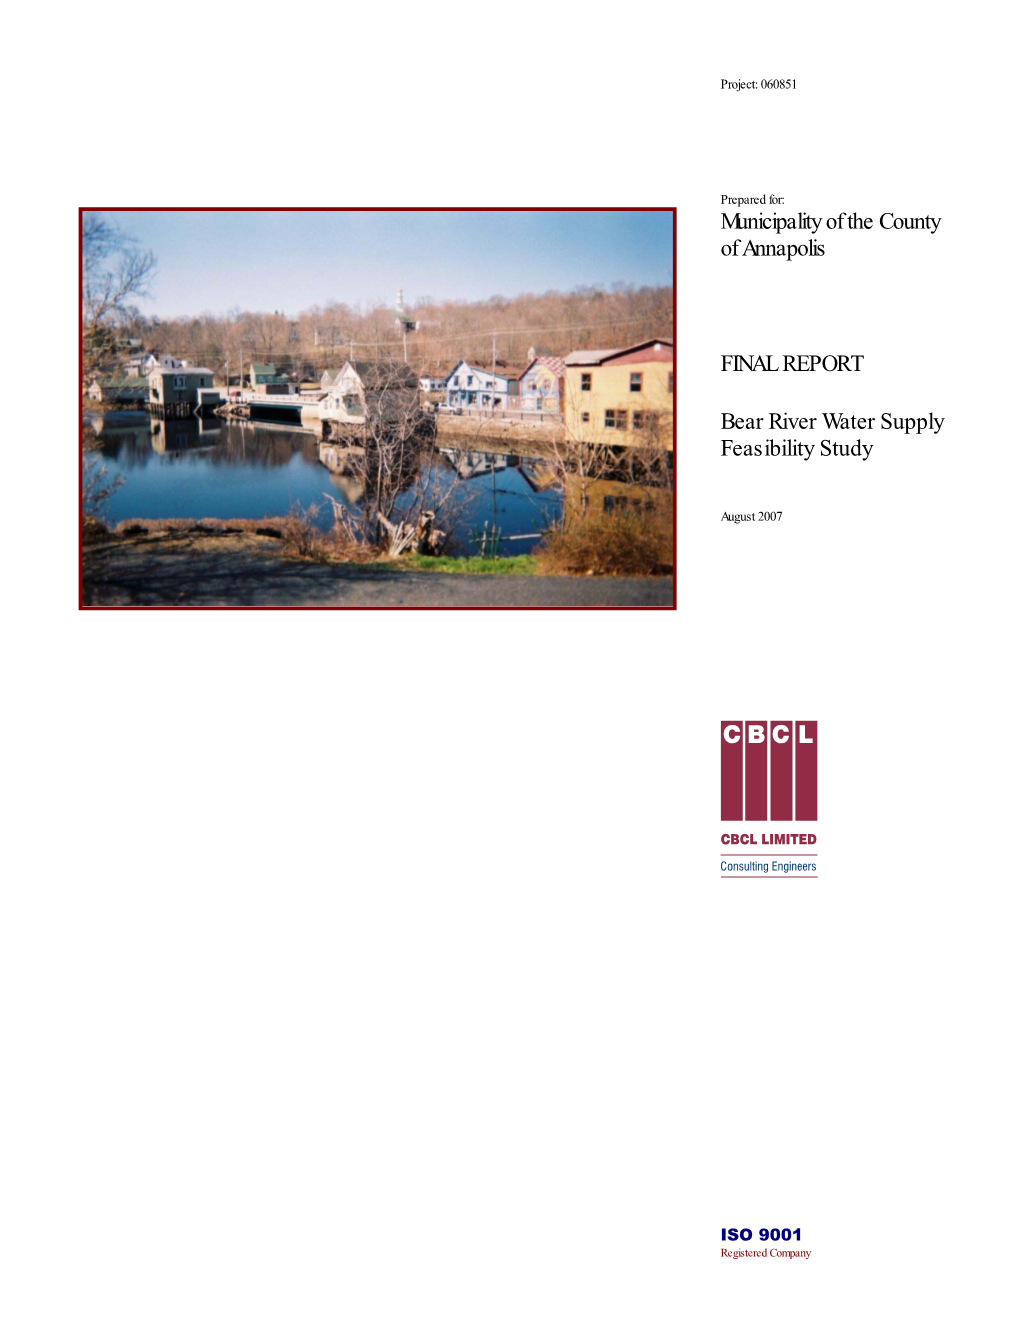 Municipality of the County of Annapolis FINAL REPORT Bear River Water Supply Feasibility Study